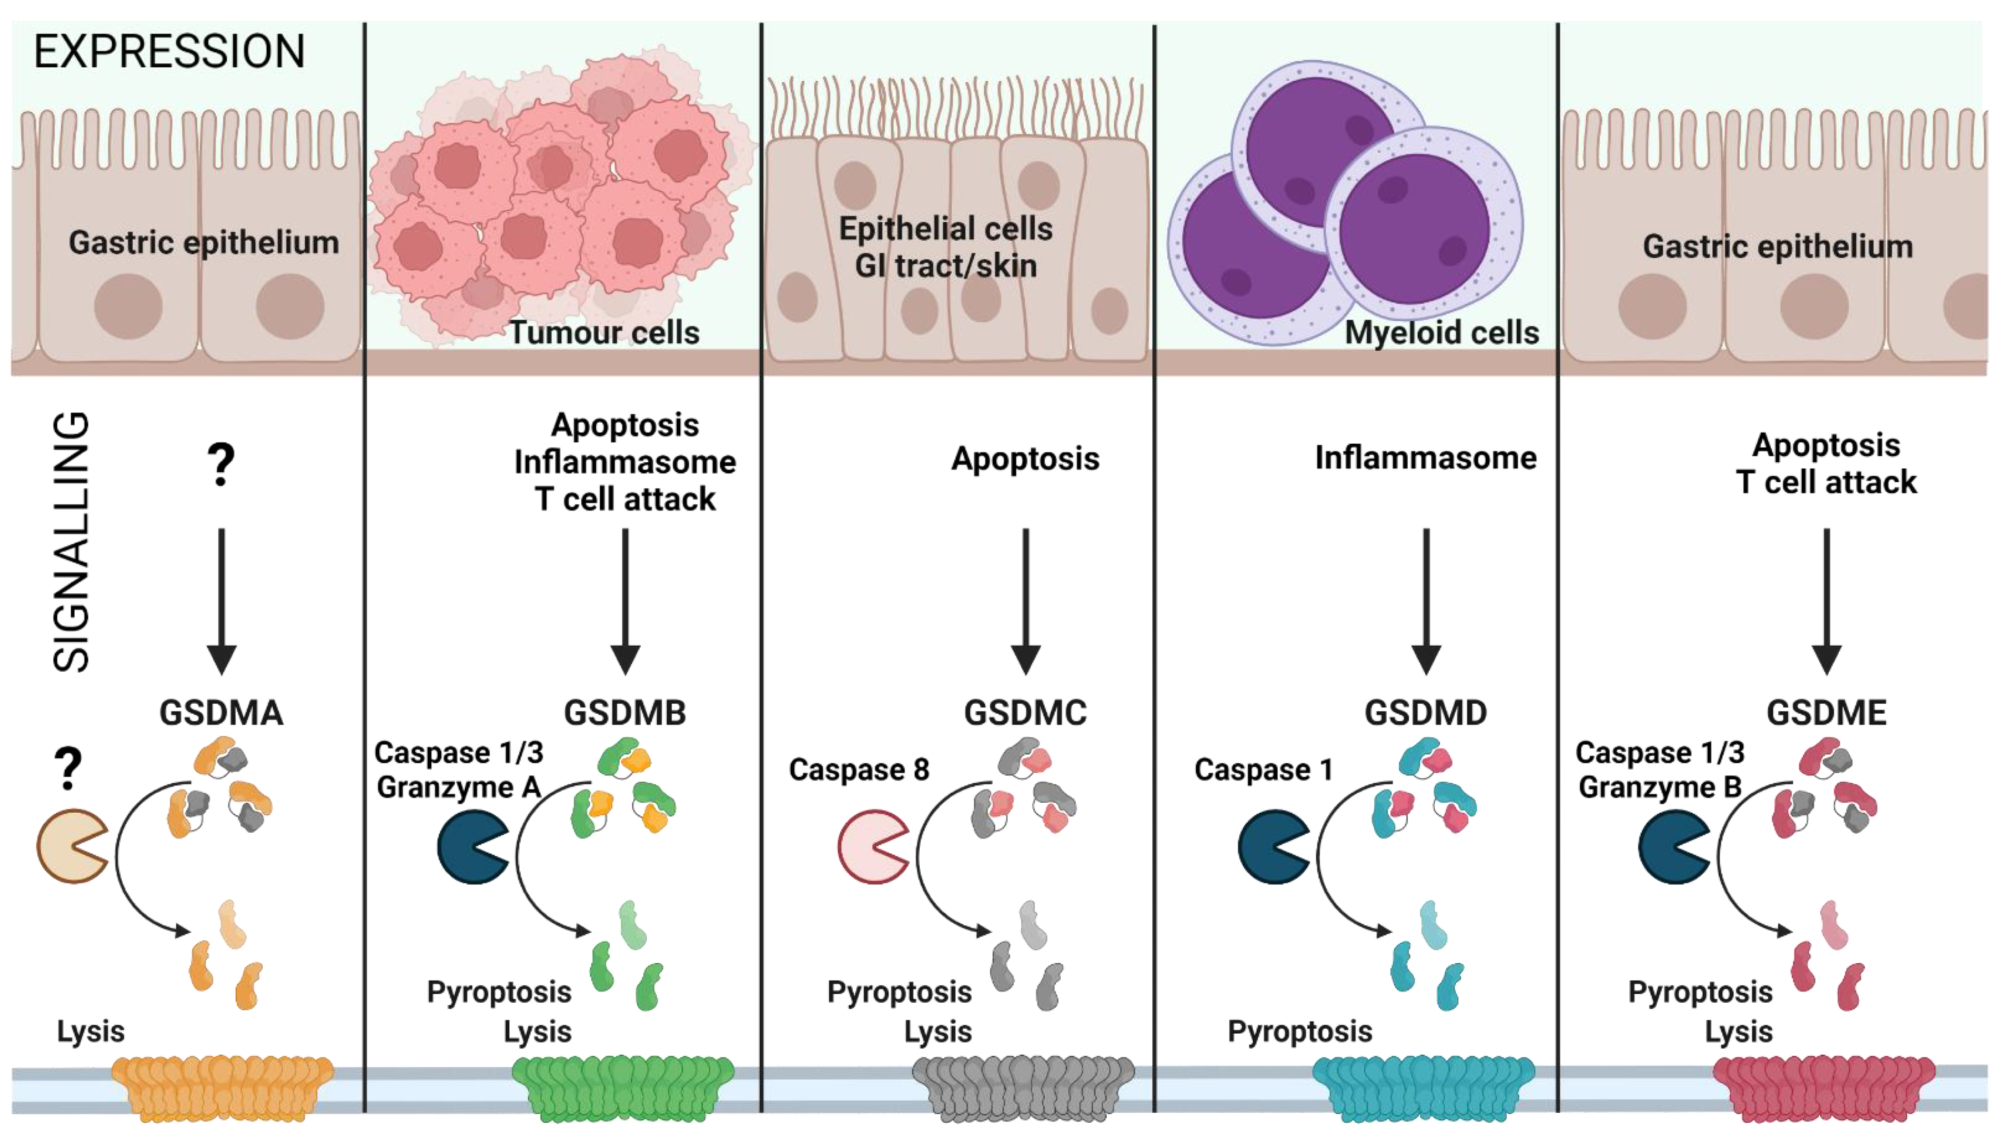 Gas termine family: tissue-specific signaling.  Gasdermin A / B / C / D / E is expressed in different cell types and is activated by different signals, leading to inflammatory or non-inflammatory cell lysis.  The upstream events for GSDMA cleavage are not well characterized (represented as '?').  GSDMA downregulation in gastric epithelial cells can lead to tumor formation.  Proliferating tumor cells are recognized by effector T cells that release Granzyme A, which cleaves GSDMB into cancer cells, leading to pore formation and tumor cell lysis.  Furthermore, GSDMB can also be activated by Caspase 1 or 3 downstream for inflammation transformation or apoptosis, leading to pyroptosis.  GSDMC is activated by Caspase 8 downstream of apoptosis, linking apoptosis with pyroptosis.  GSDMD is the best characterized GSDM effector molecule, cleaved downstream of inflammasome activation, leading to pyroptosis.  Similar to GSDMC, GSDME associates apoptosis with pyroptosis after cleavage of Caspase 3 into apoptotic cells.  (Created with BioRender.com on May 7, 2022).